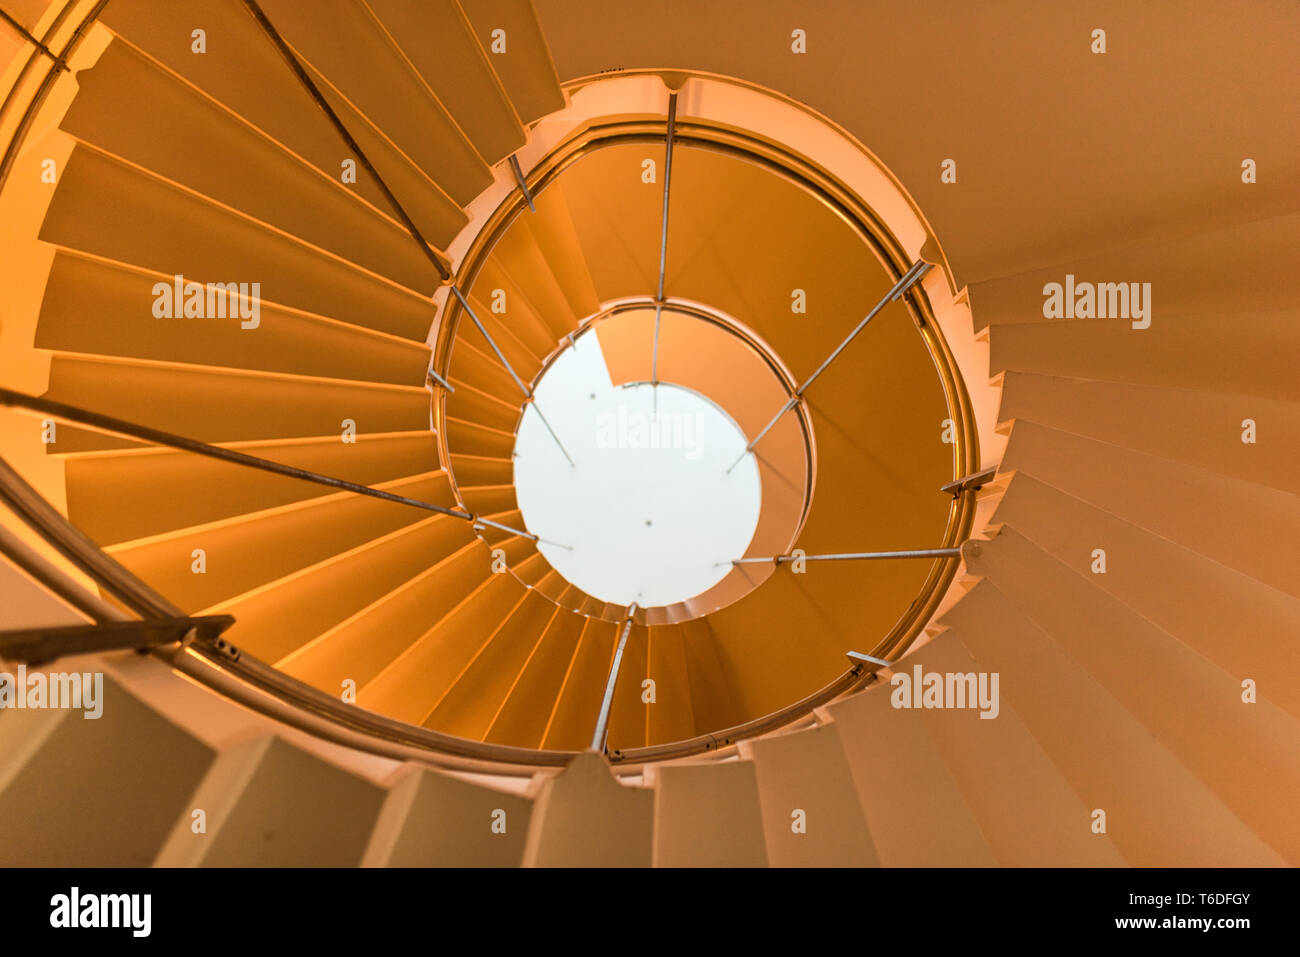 Helical staircase in an exclusive building Stock Photo